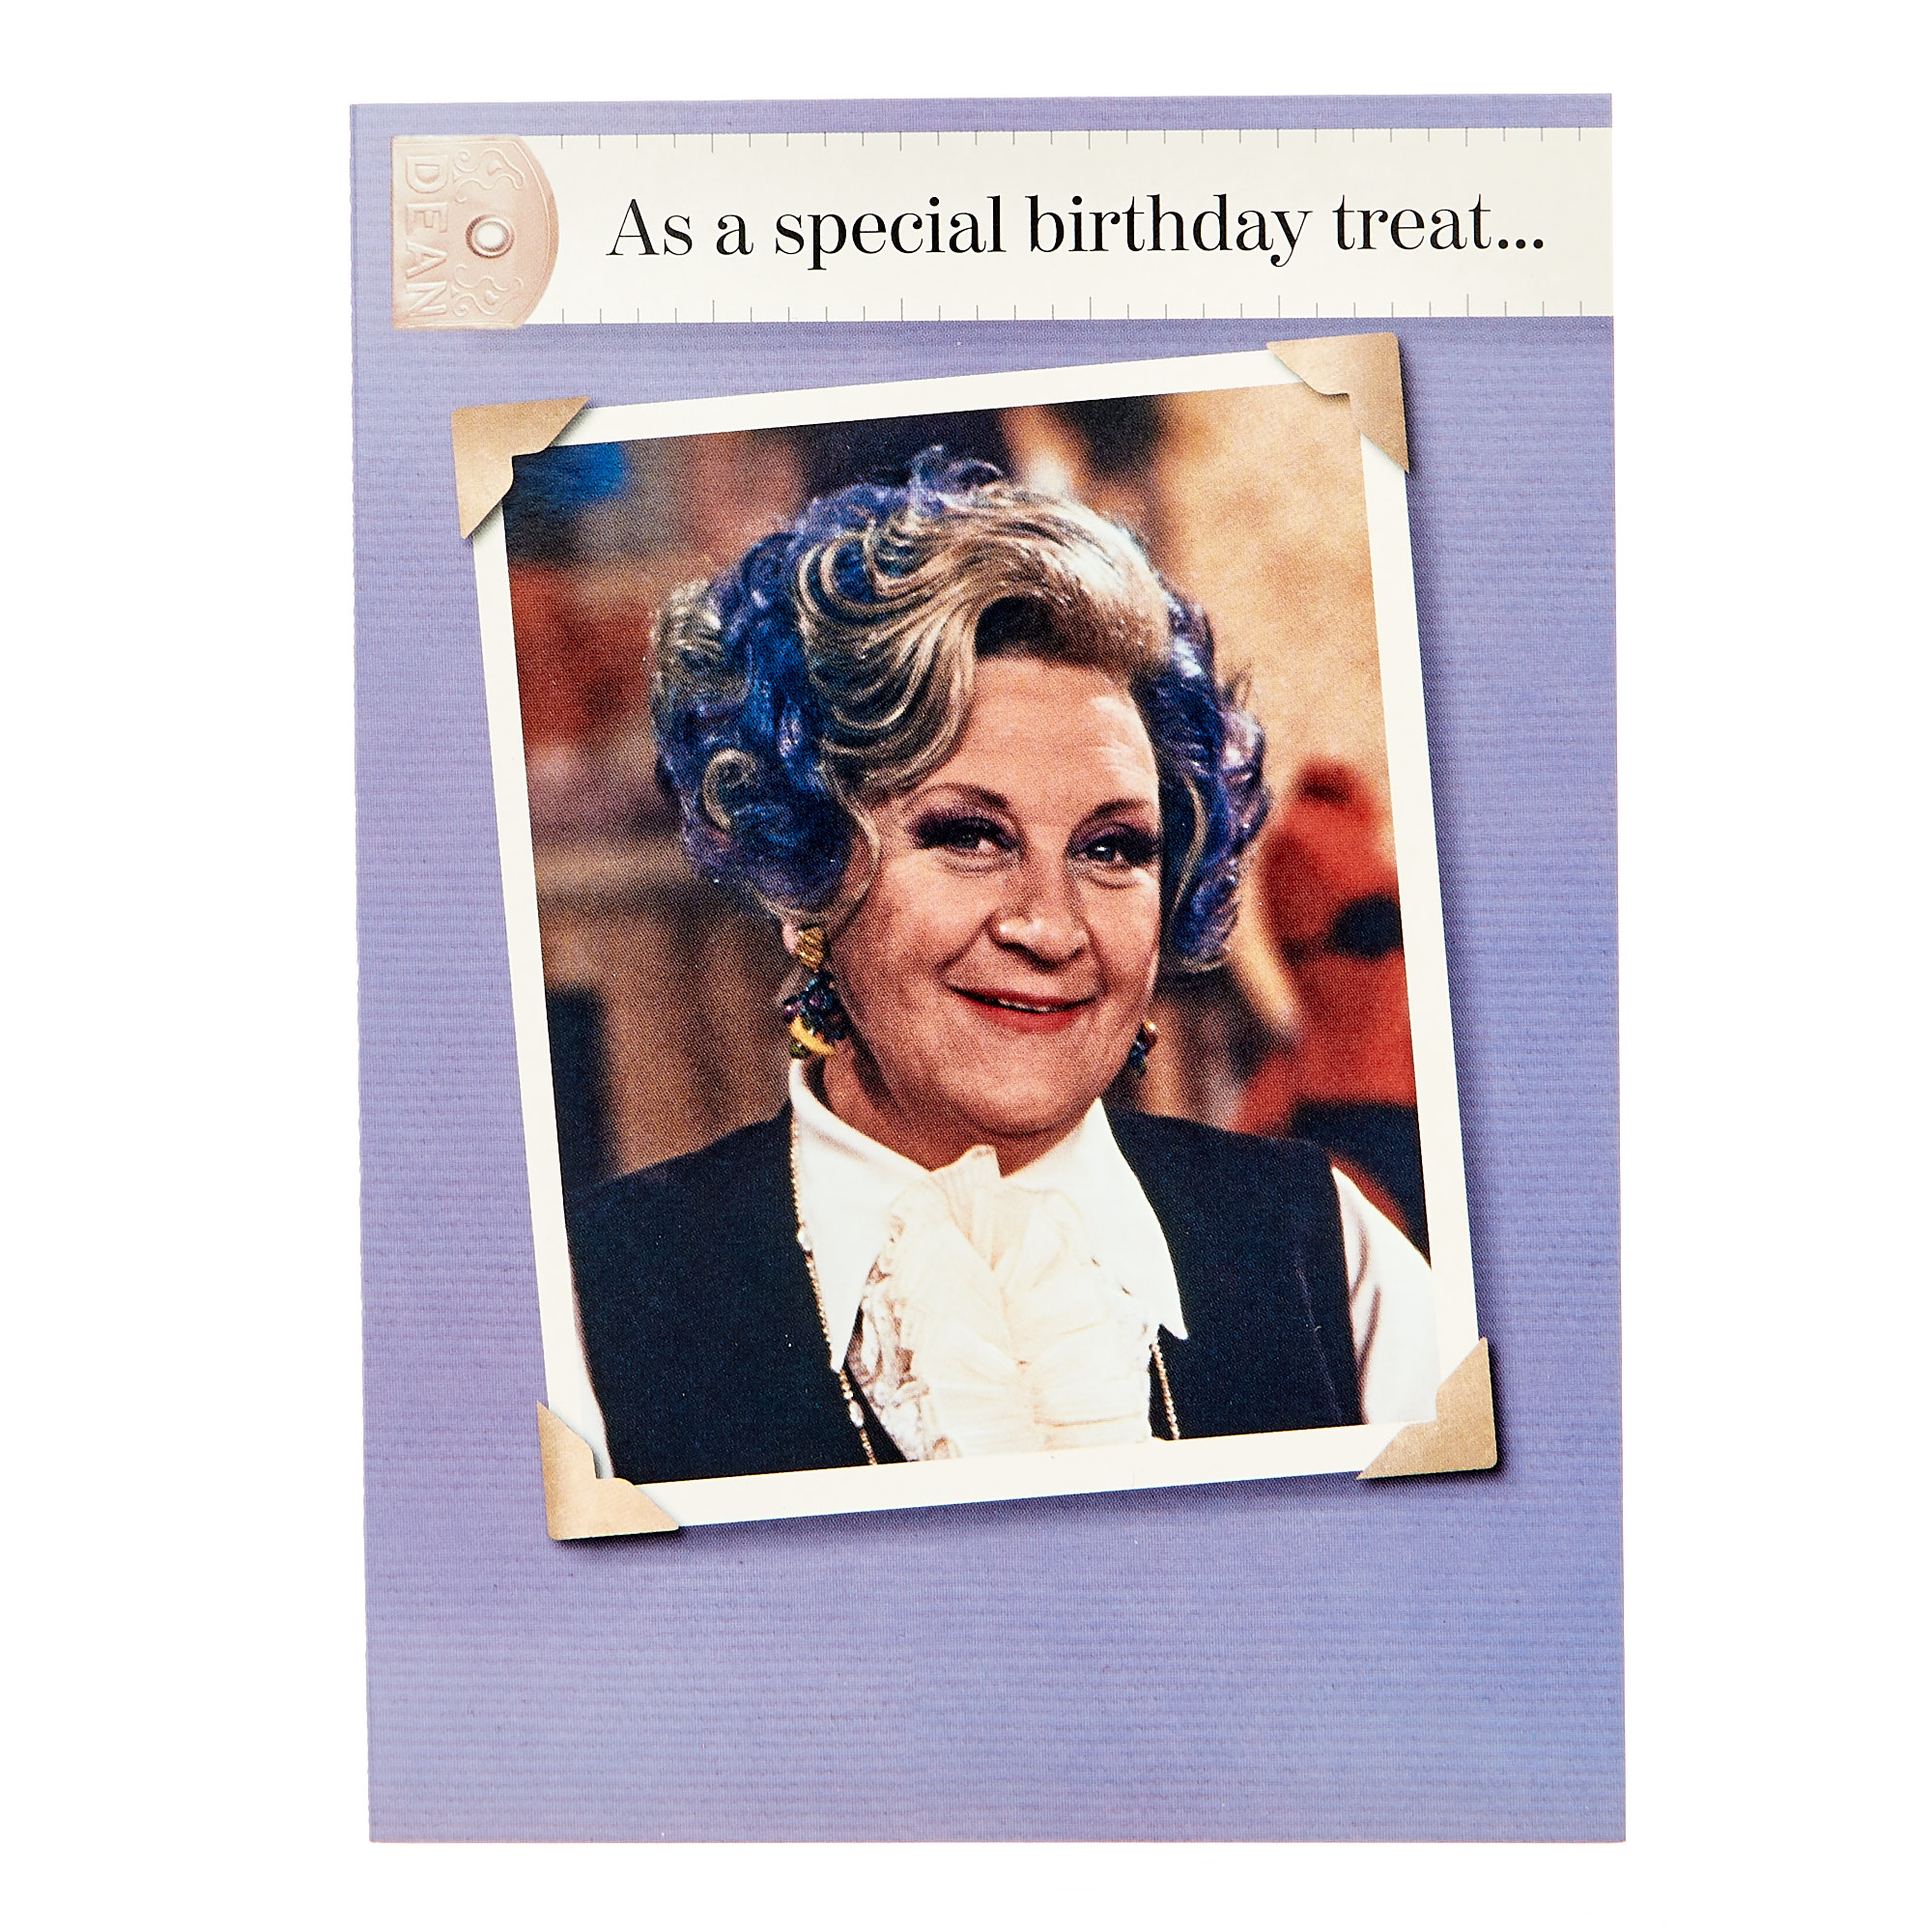 Are You being Served Birthday Card - Special Treat...